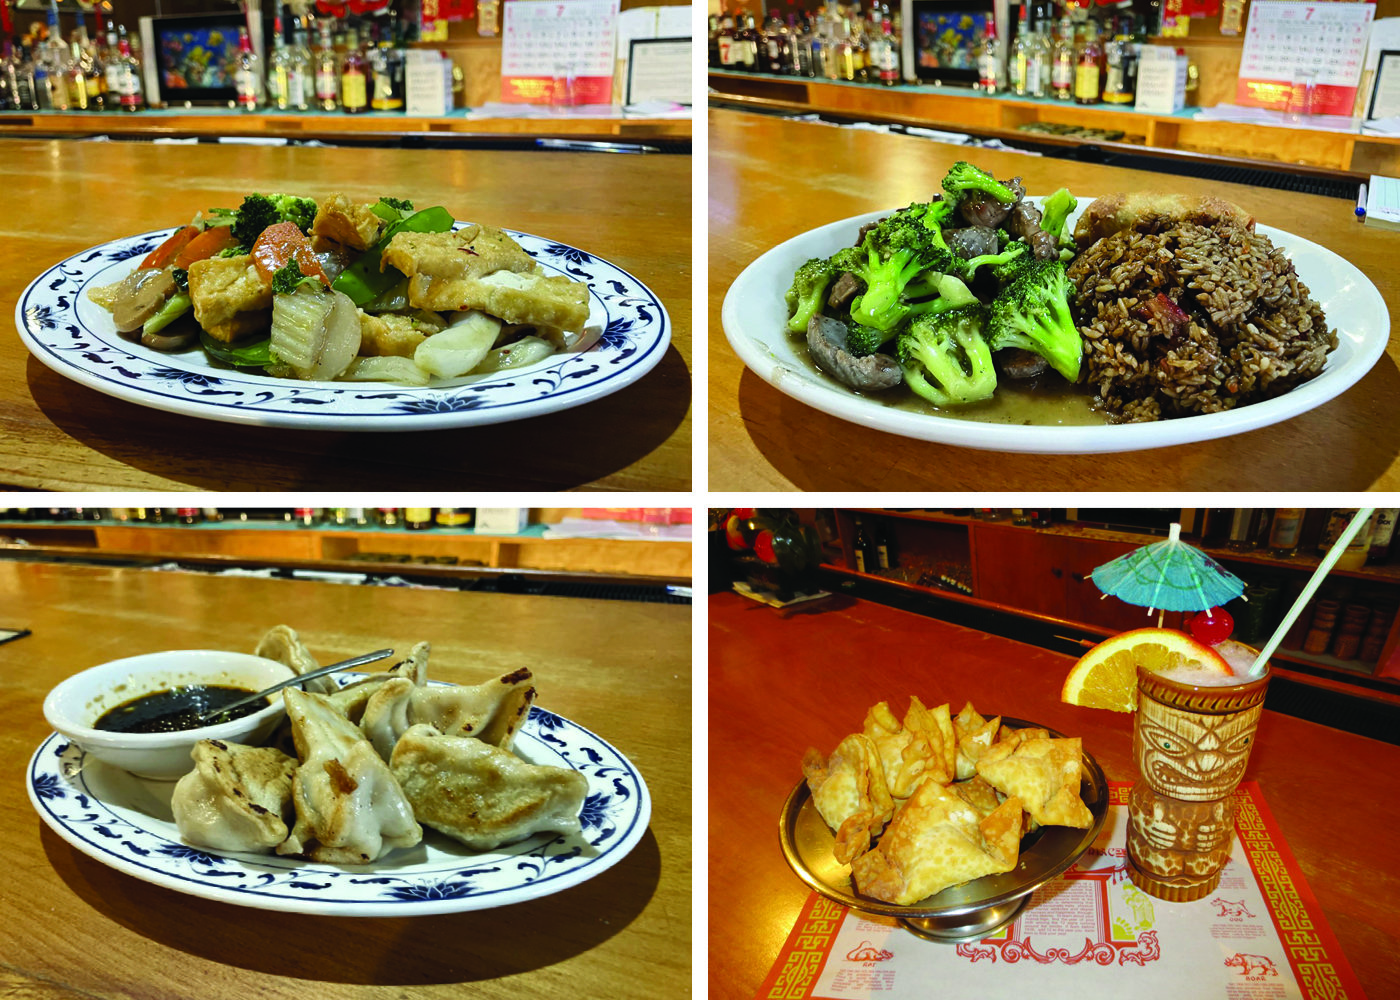 Let the devoted staff at China Sea, including longtime owner Ed Chu, help ease your burden this holiday season! Call 467-7440 for take-out or dine-in for delicious means such as these four mouth-watering options.